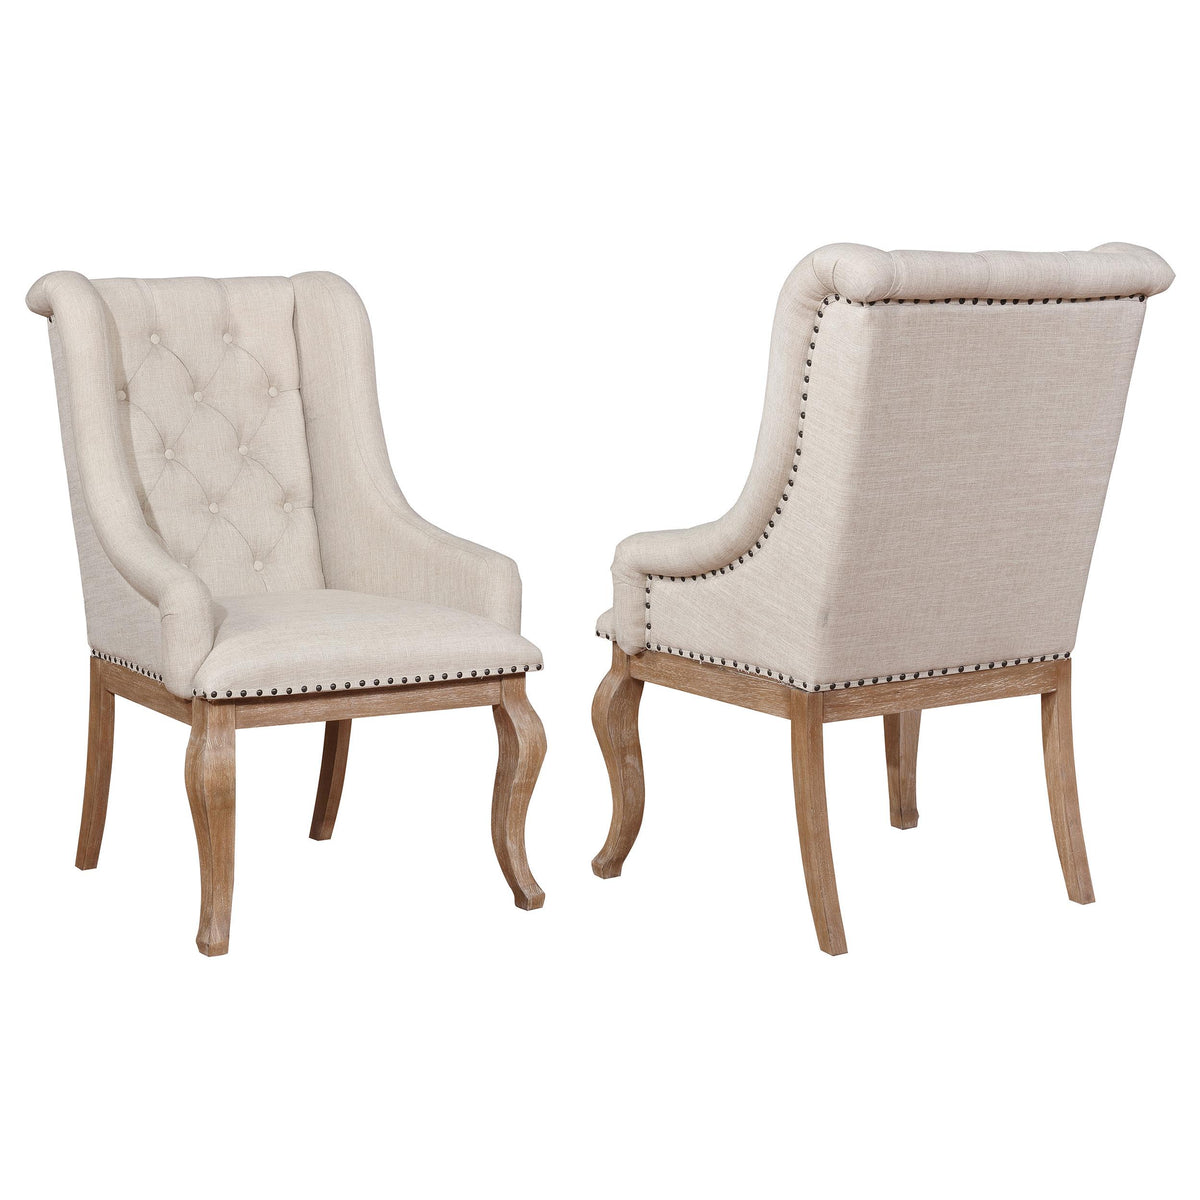 Brockway Tufted Arm Chairs Cream and Barley Brown (Set of 2)  Las Vegas Furniture Stores